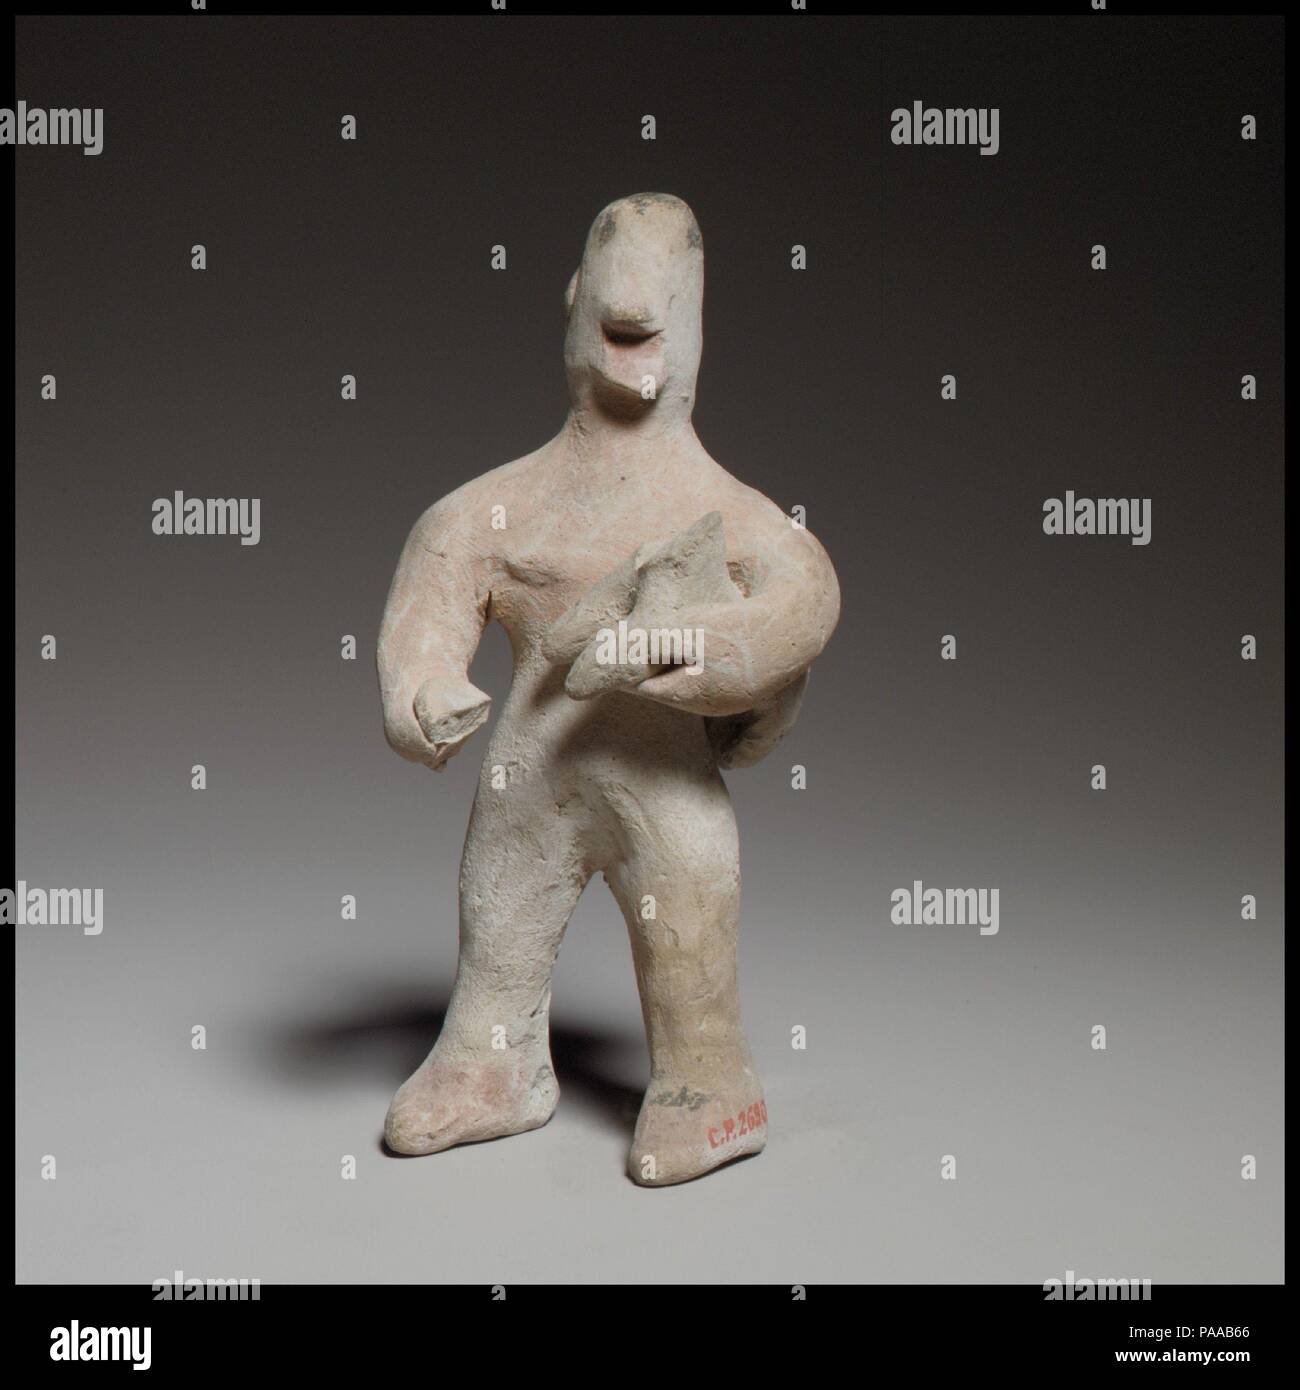 Standing male figurine holding a quadruped. Culture: Cypriot. Dimensions: H. 4 7/16 in. (11.3 cm). Date: ca. 600-480 B.C..  The handmade and solid figurine stands with its legs apart. The legs are columnar, the feet rendered with painted shoes. Museum: Metropolitan Museum of Art, New York, USA. Stock Photo